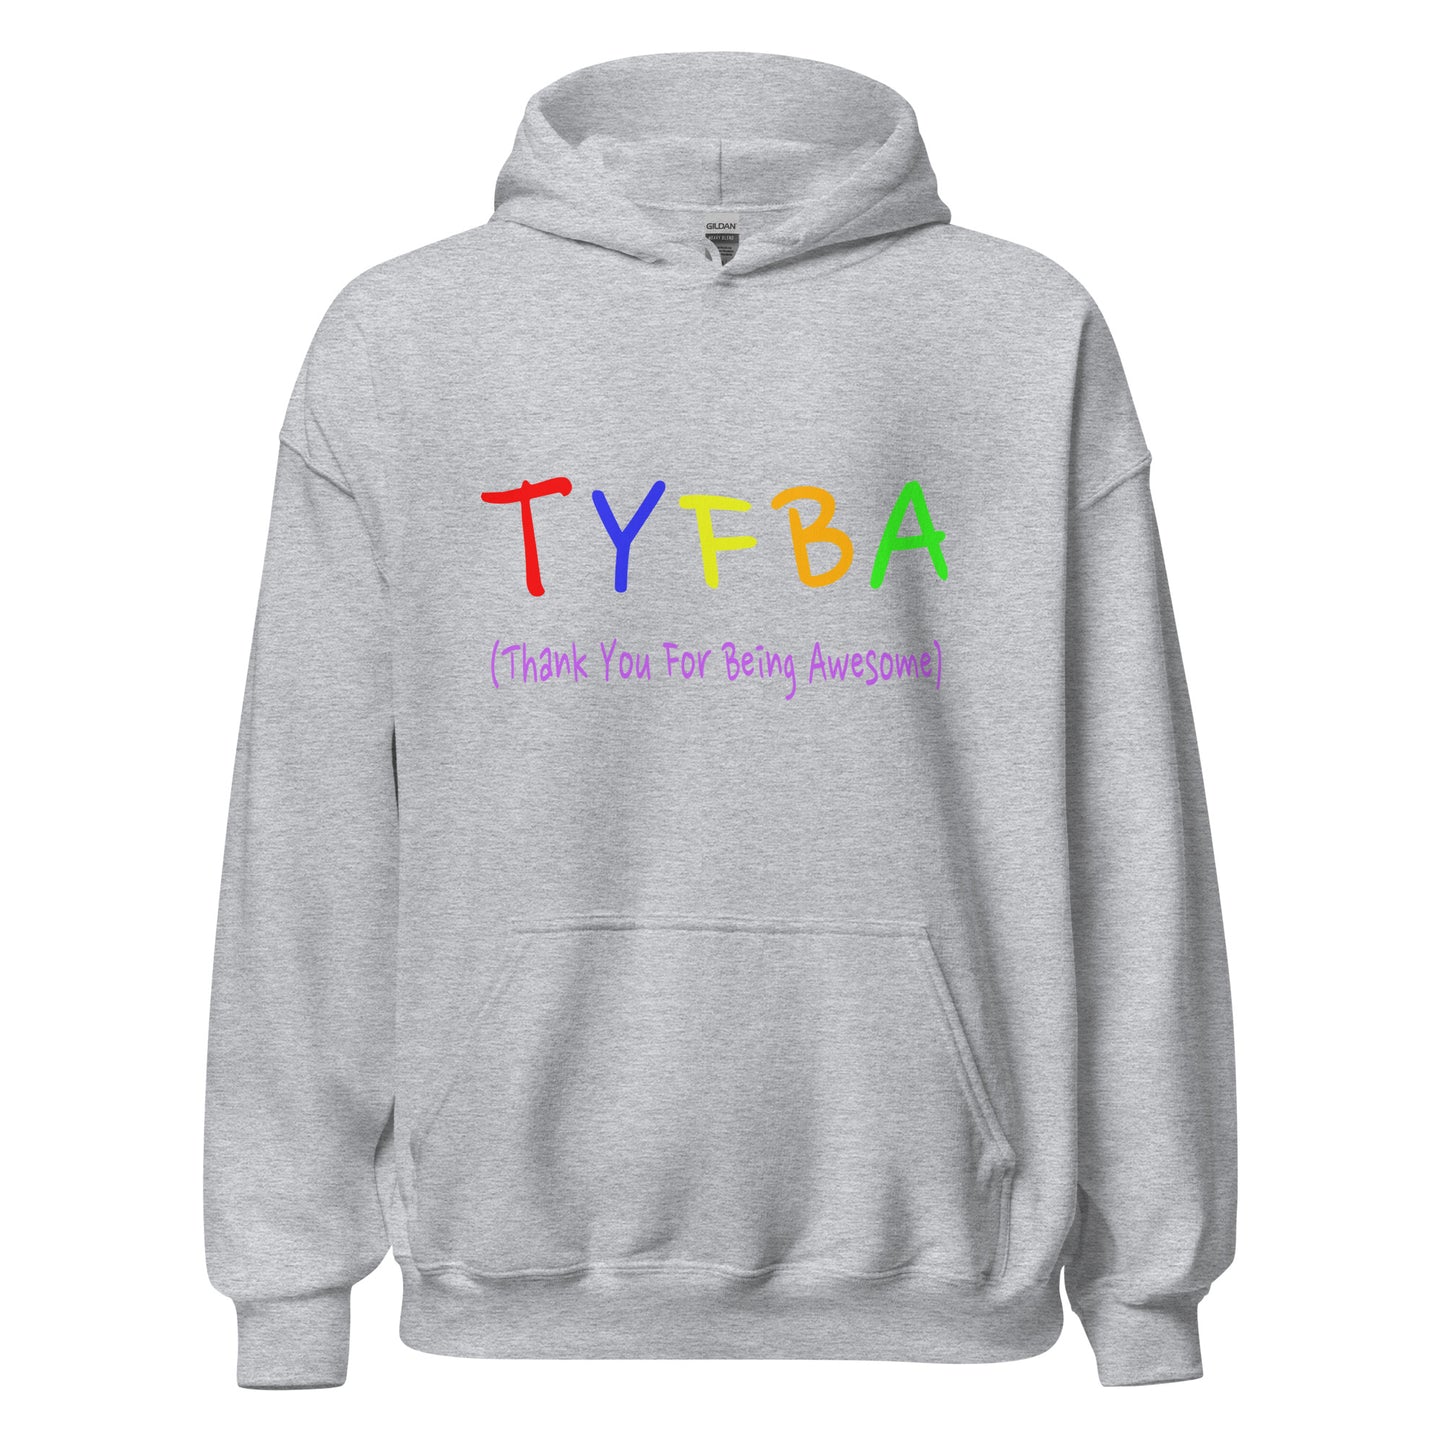 TYFBA: Thank You For Being Awesome Unisex Hoodie